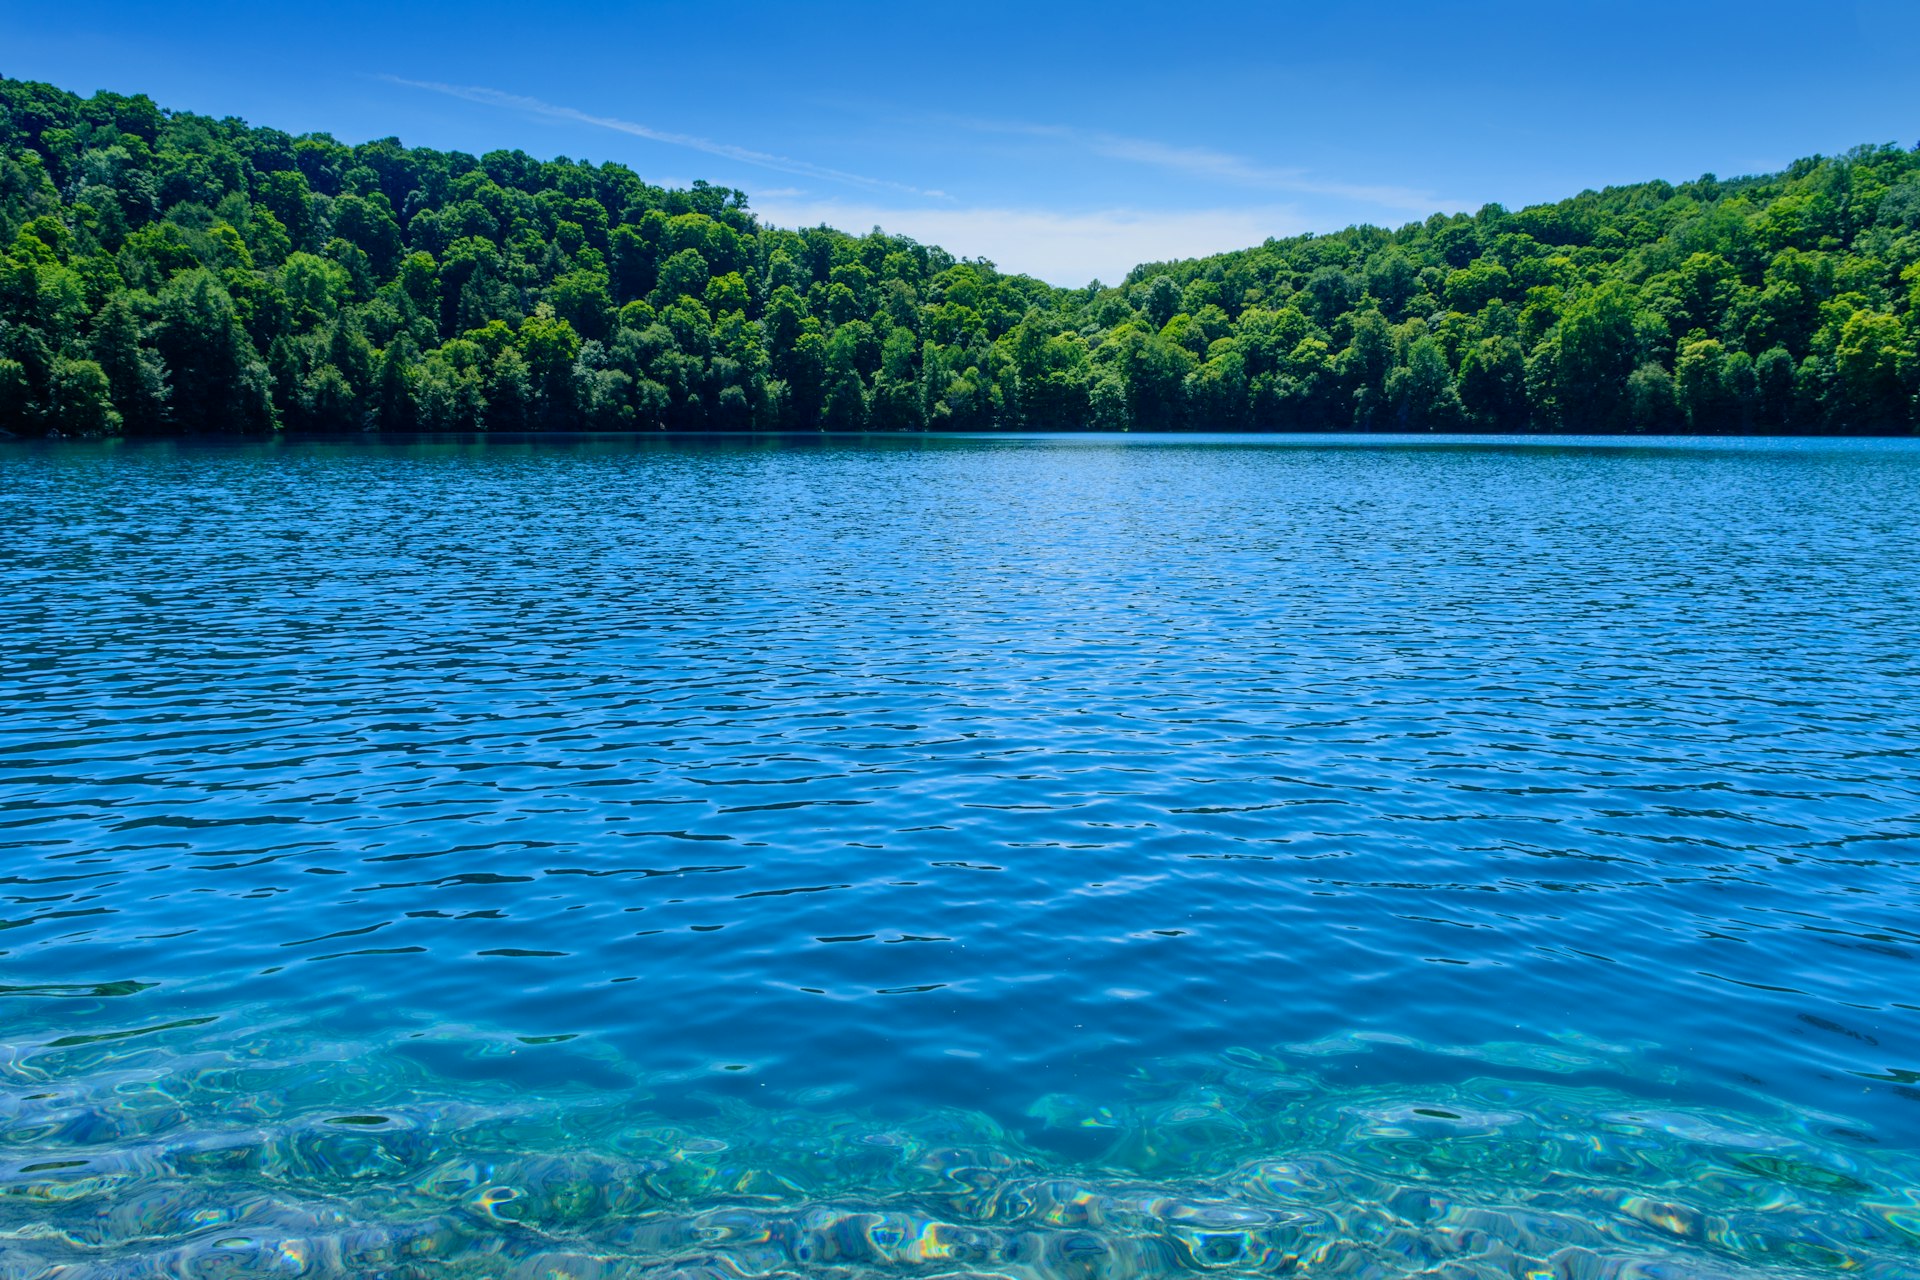 Blue waters over a rocky shore with trees in the background on a sunny day at Green Lakes State Park, New York State